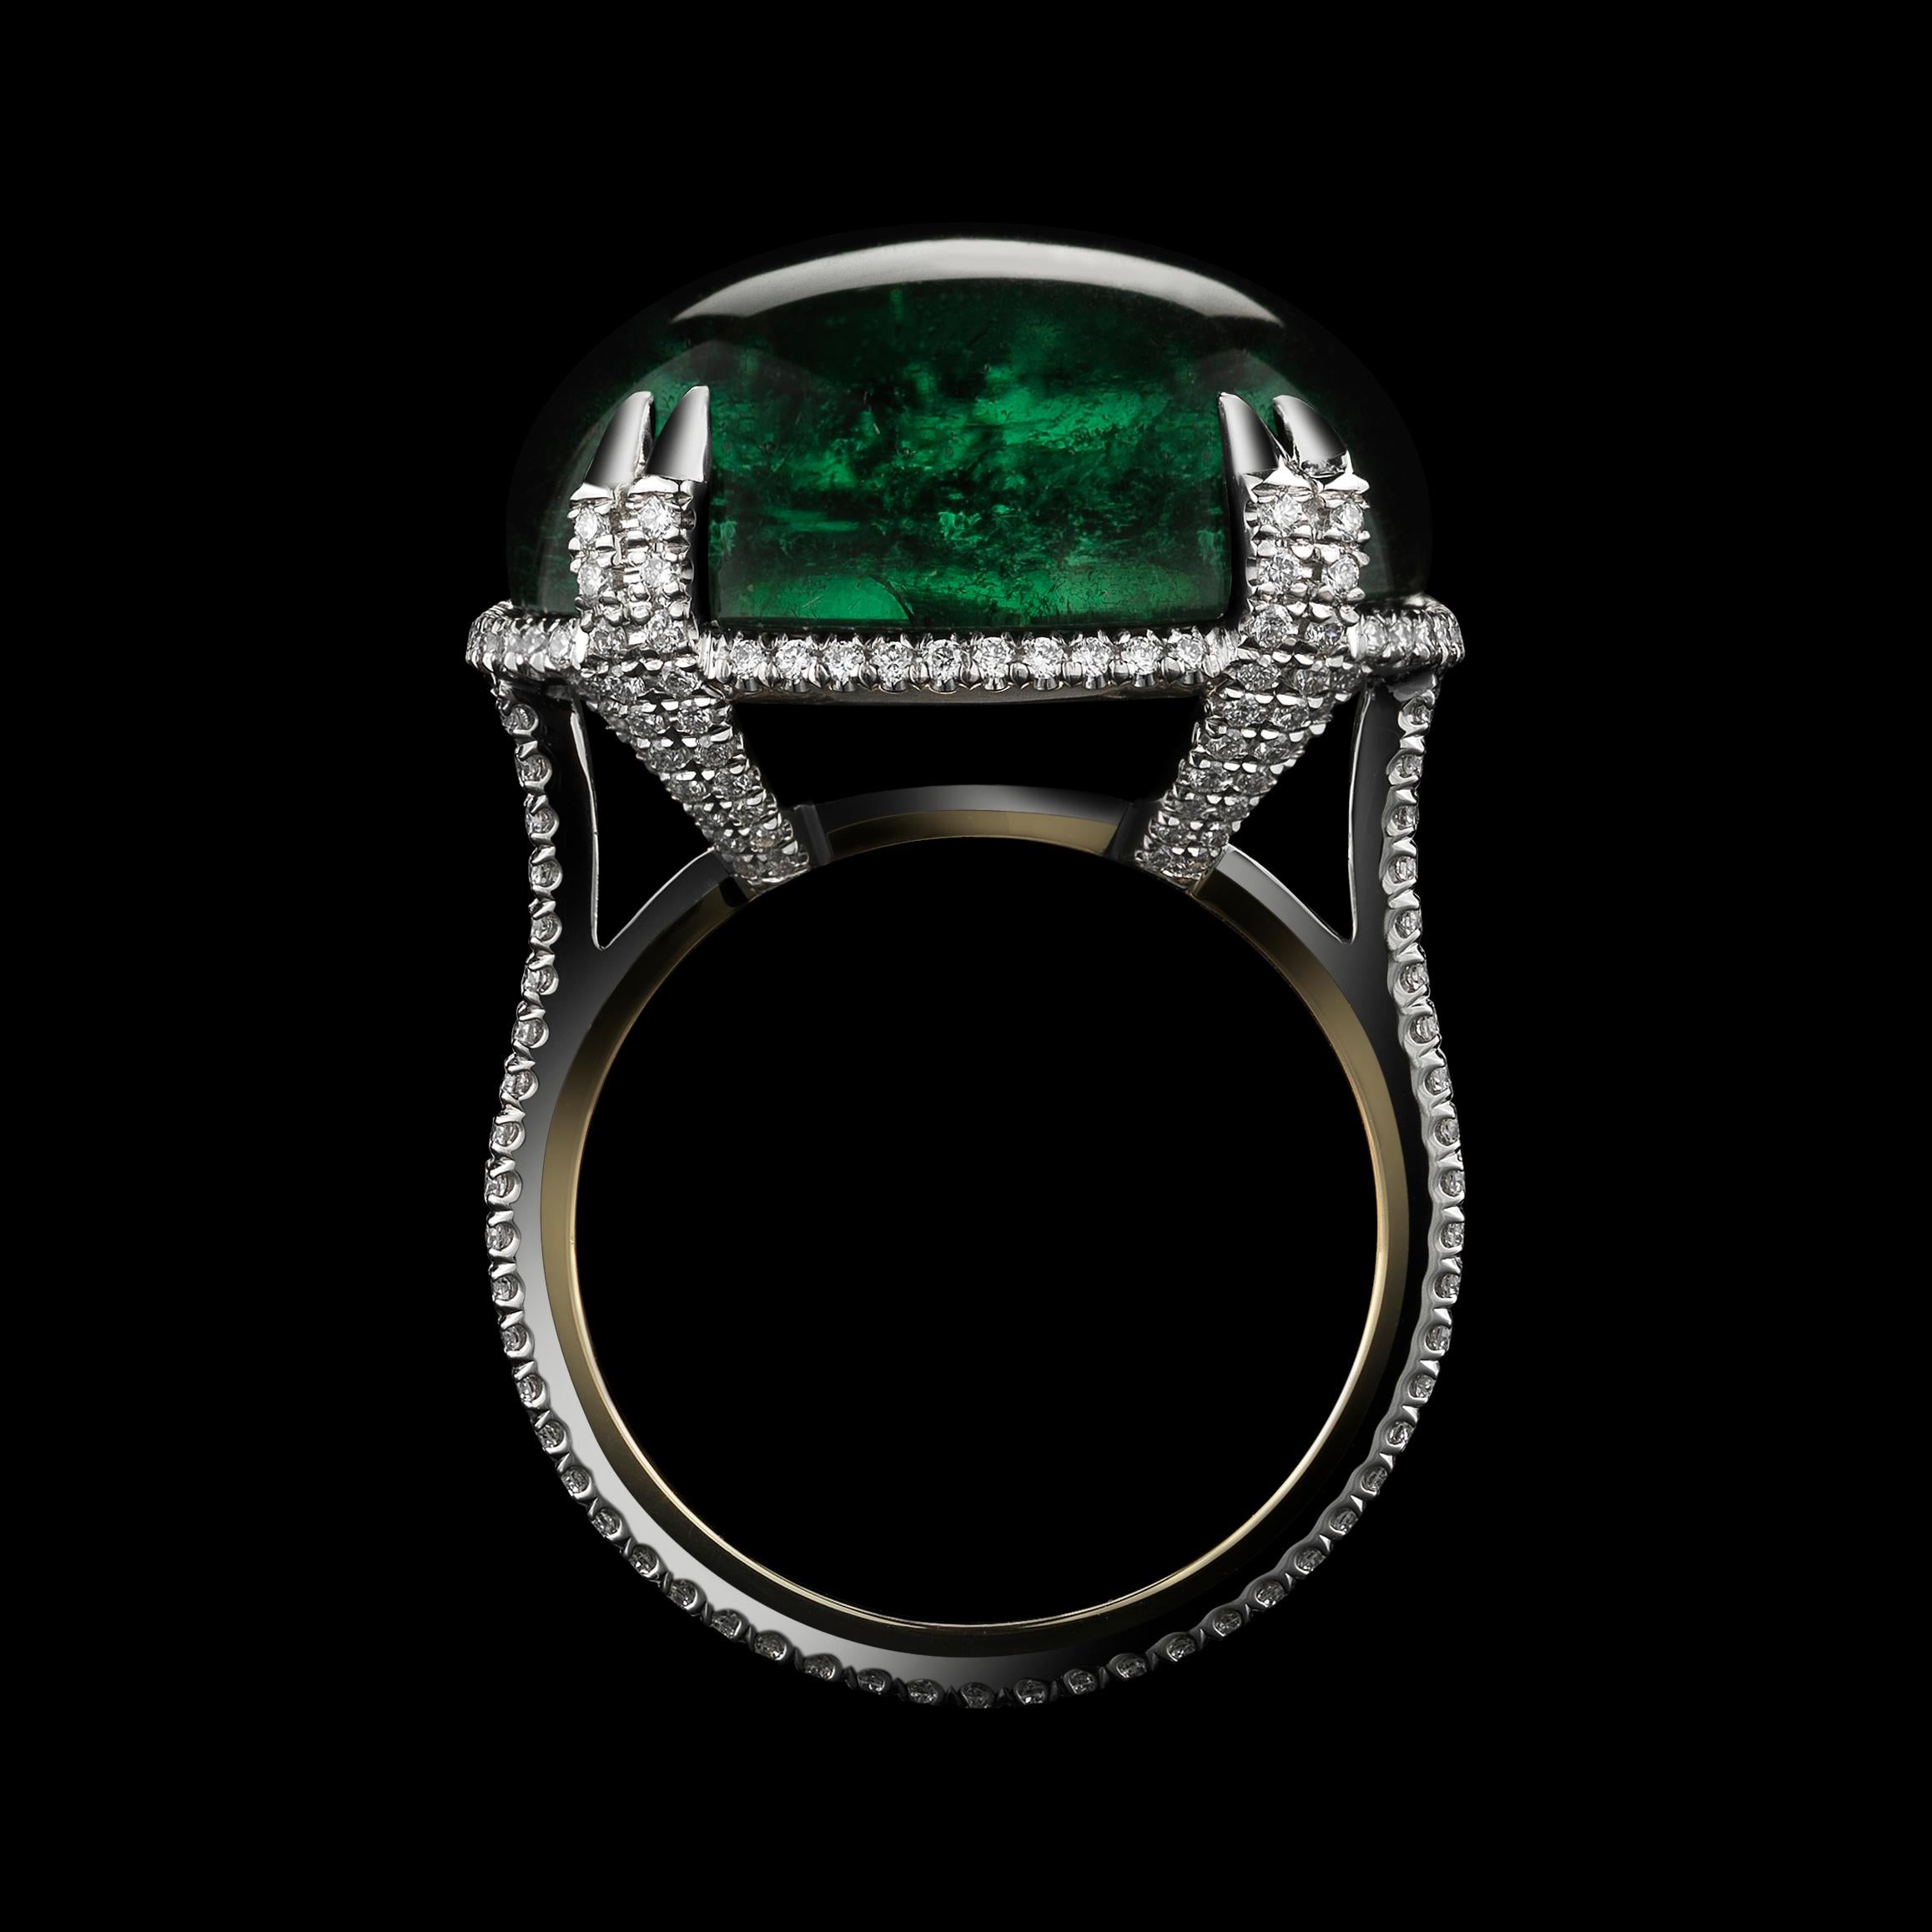 This One-of-A-Kind Alexandra Mor ring features a 23.39-carat Cabochon Green Tourmaline set with Alexandra Mor's signature floating Diamond melee and knife-edged wire. The ring is set in platinum on 18 karats yellow gold Alexandra Mor logo gallery.